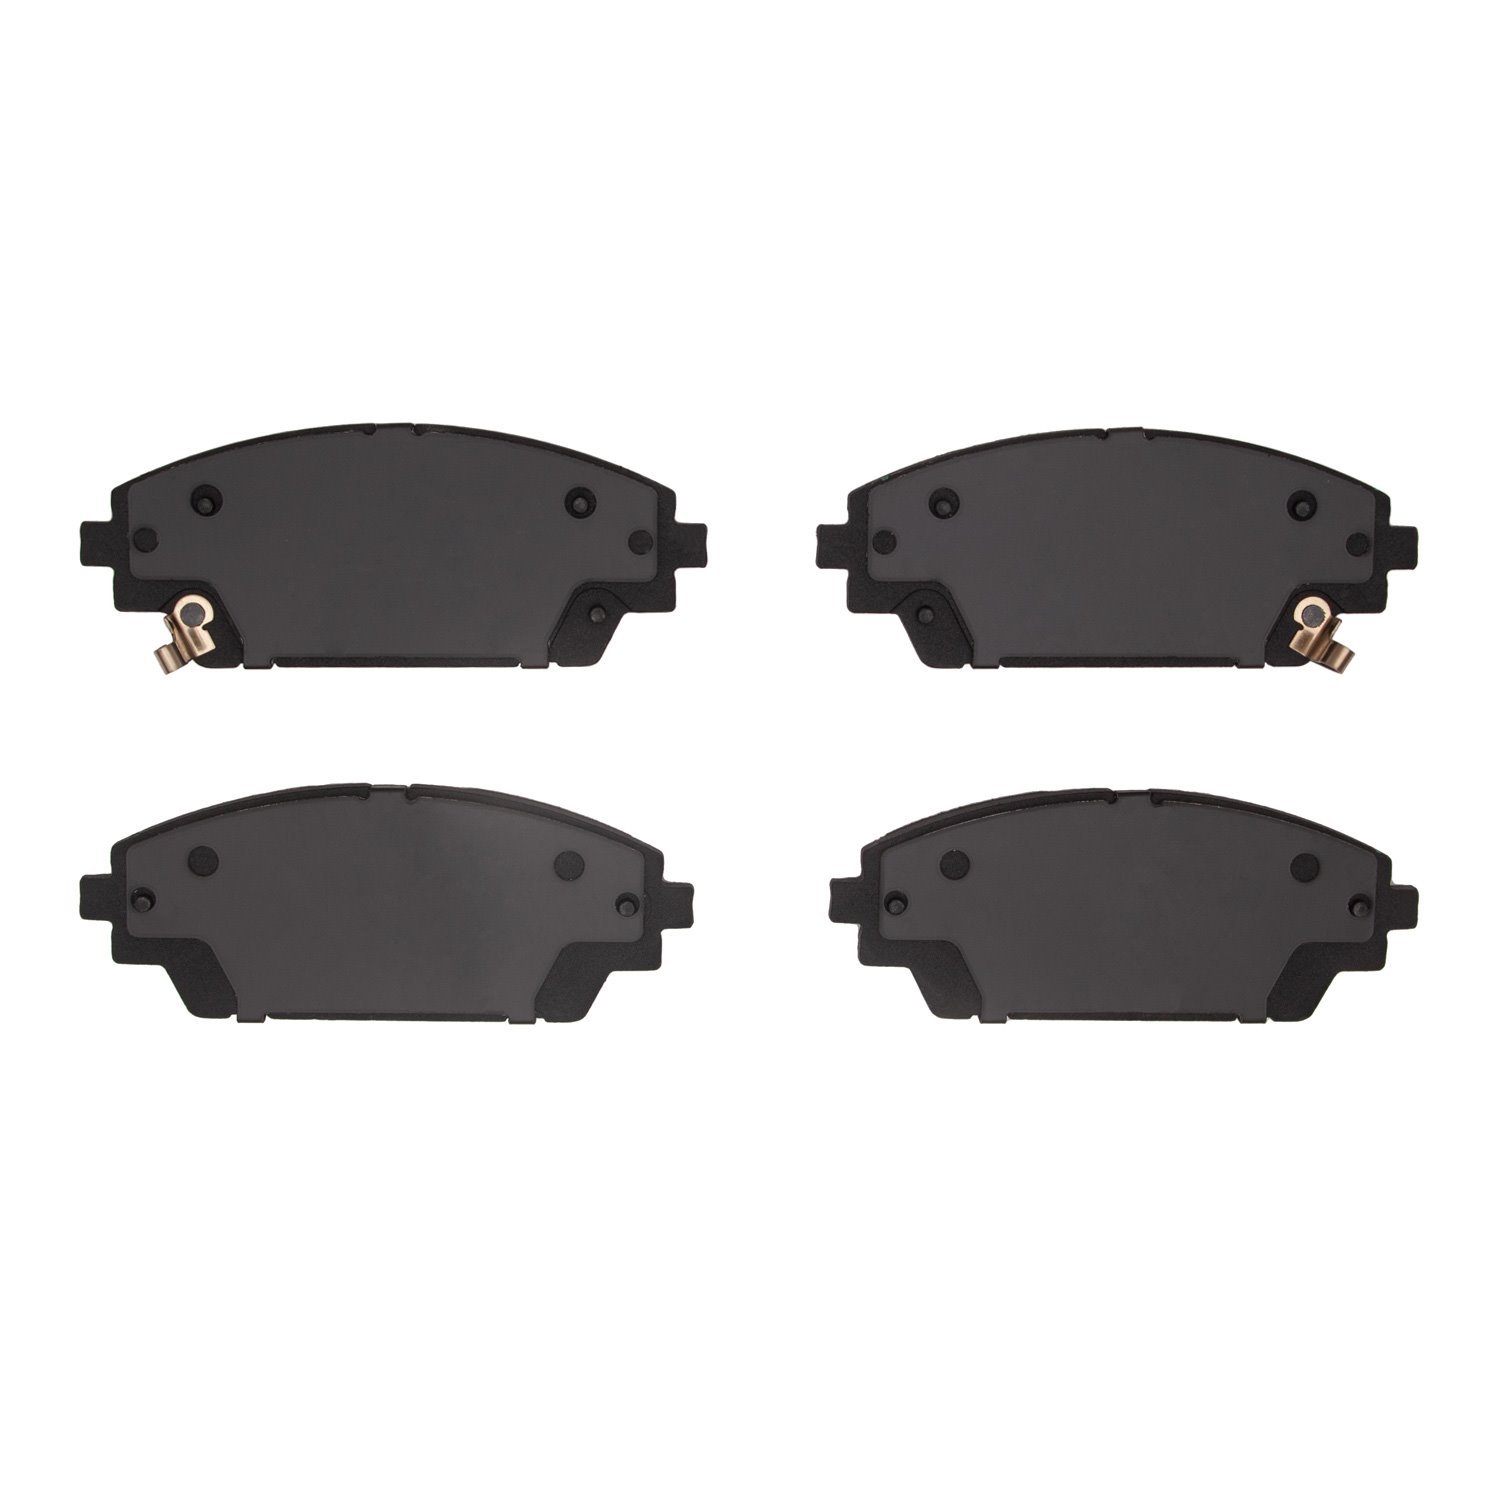 1310-2275-00 3000-Series Ceramic Brake Pads, Fits Select Ford/Lincoln/Mercury/Mazda, Position: Front